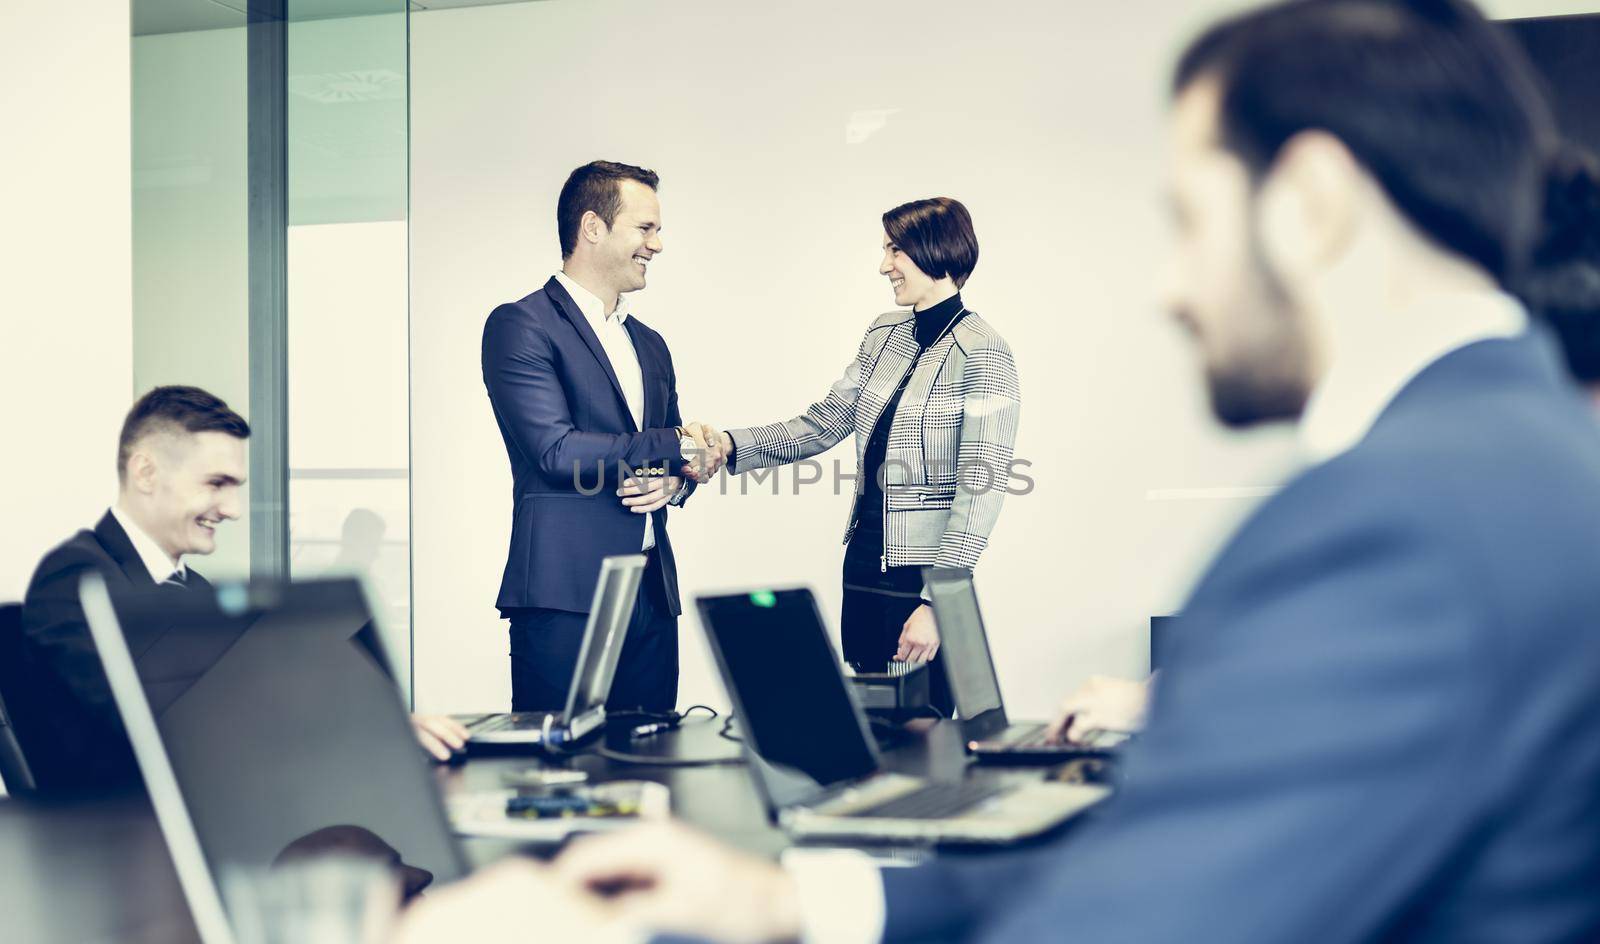 Sealing a deal. Business people shaking hands, finishing up meeting in corporate office. Businessman working on laptop in foreground. Business and entrepreneurship concept.